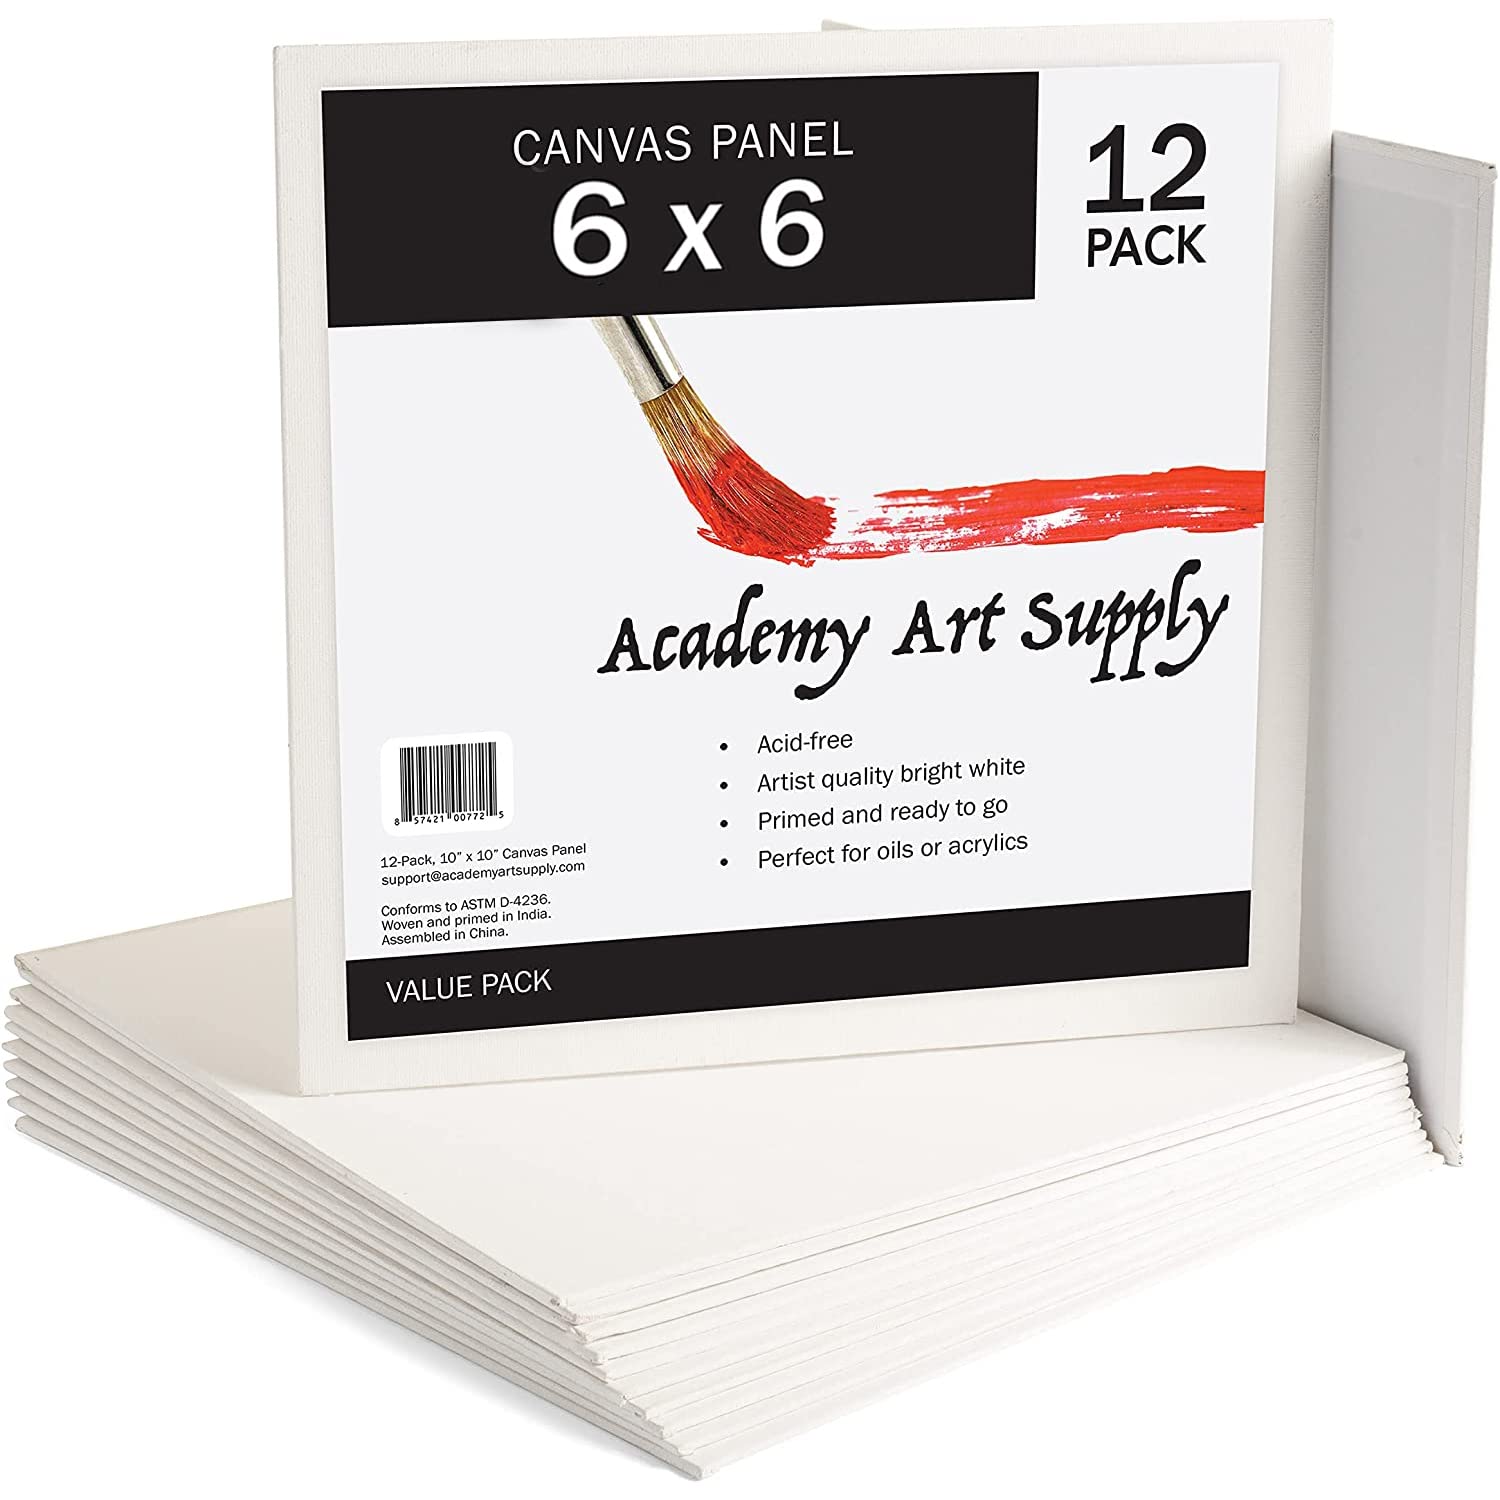 Academy Art Supply Canvases Panels 8 x 10 inch - 100% Cotton Artist Blank  Canvas Board for Painting, Pre-gessoed, Primed, Acid-Free Blank Canvas